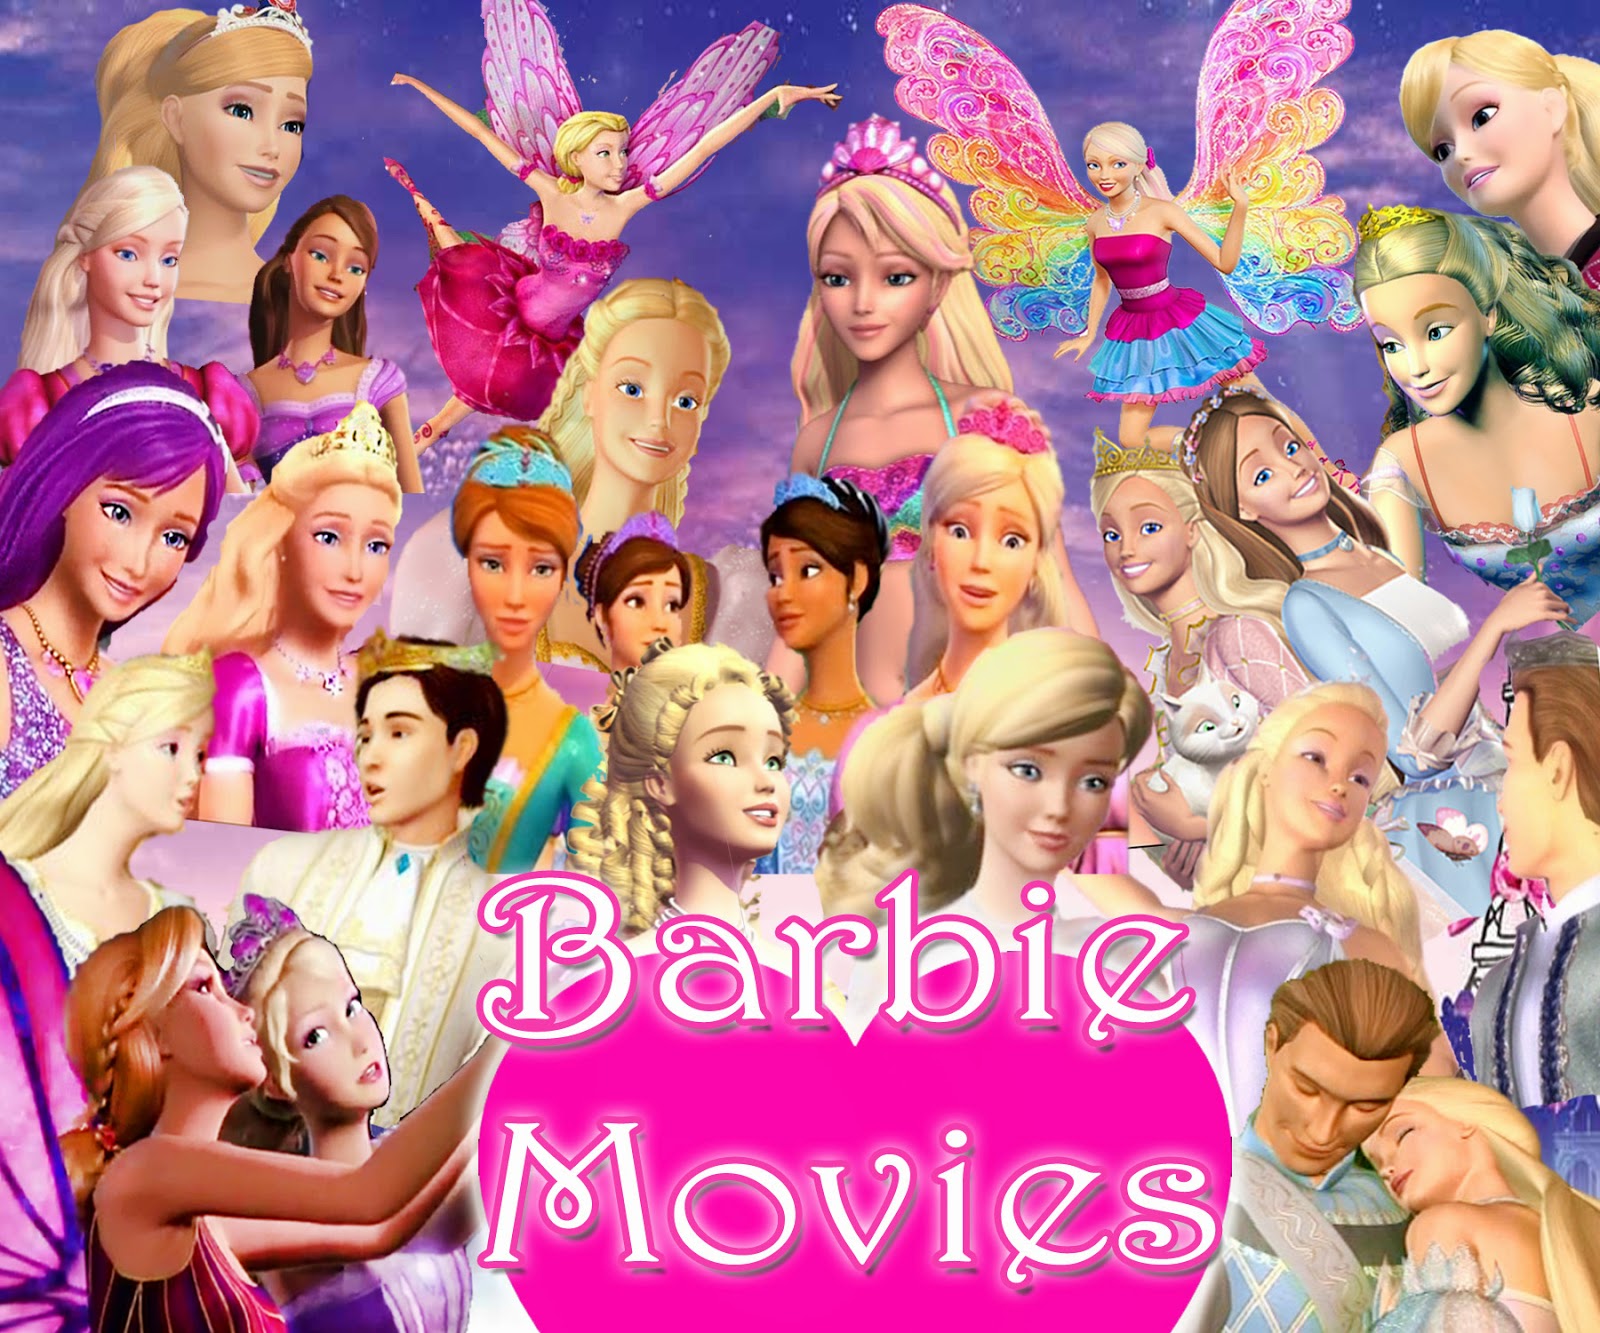 The Disney collections The Barbie Movie collections